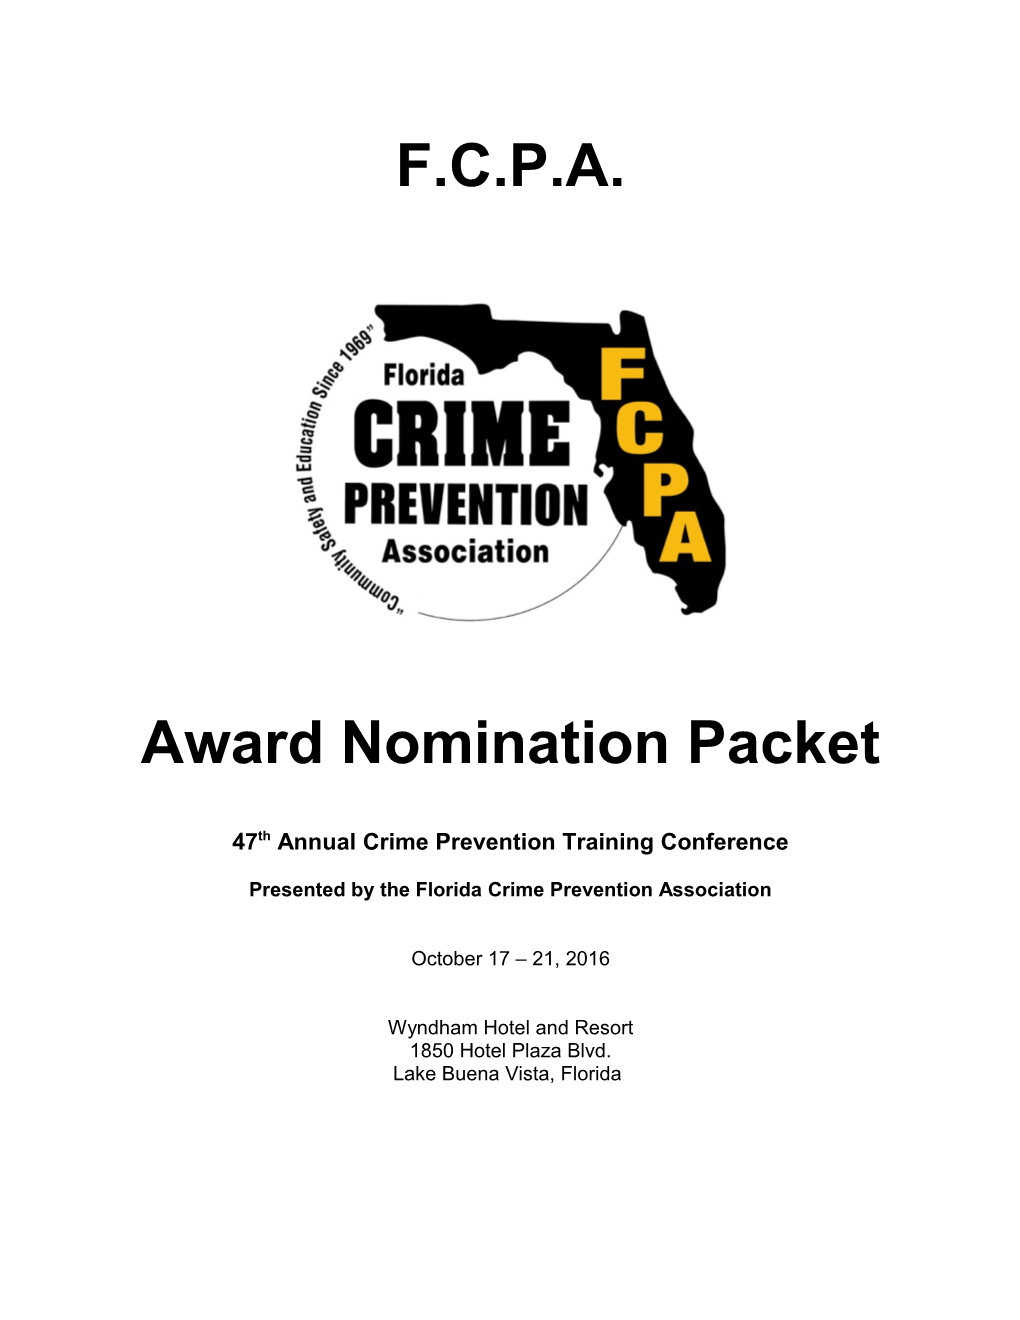 Presented by Theflorida Crime Prevention Association